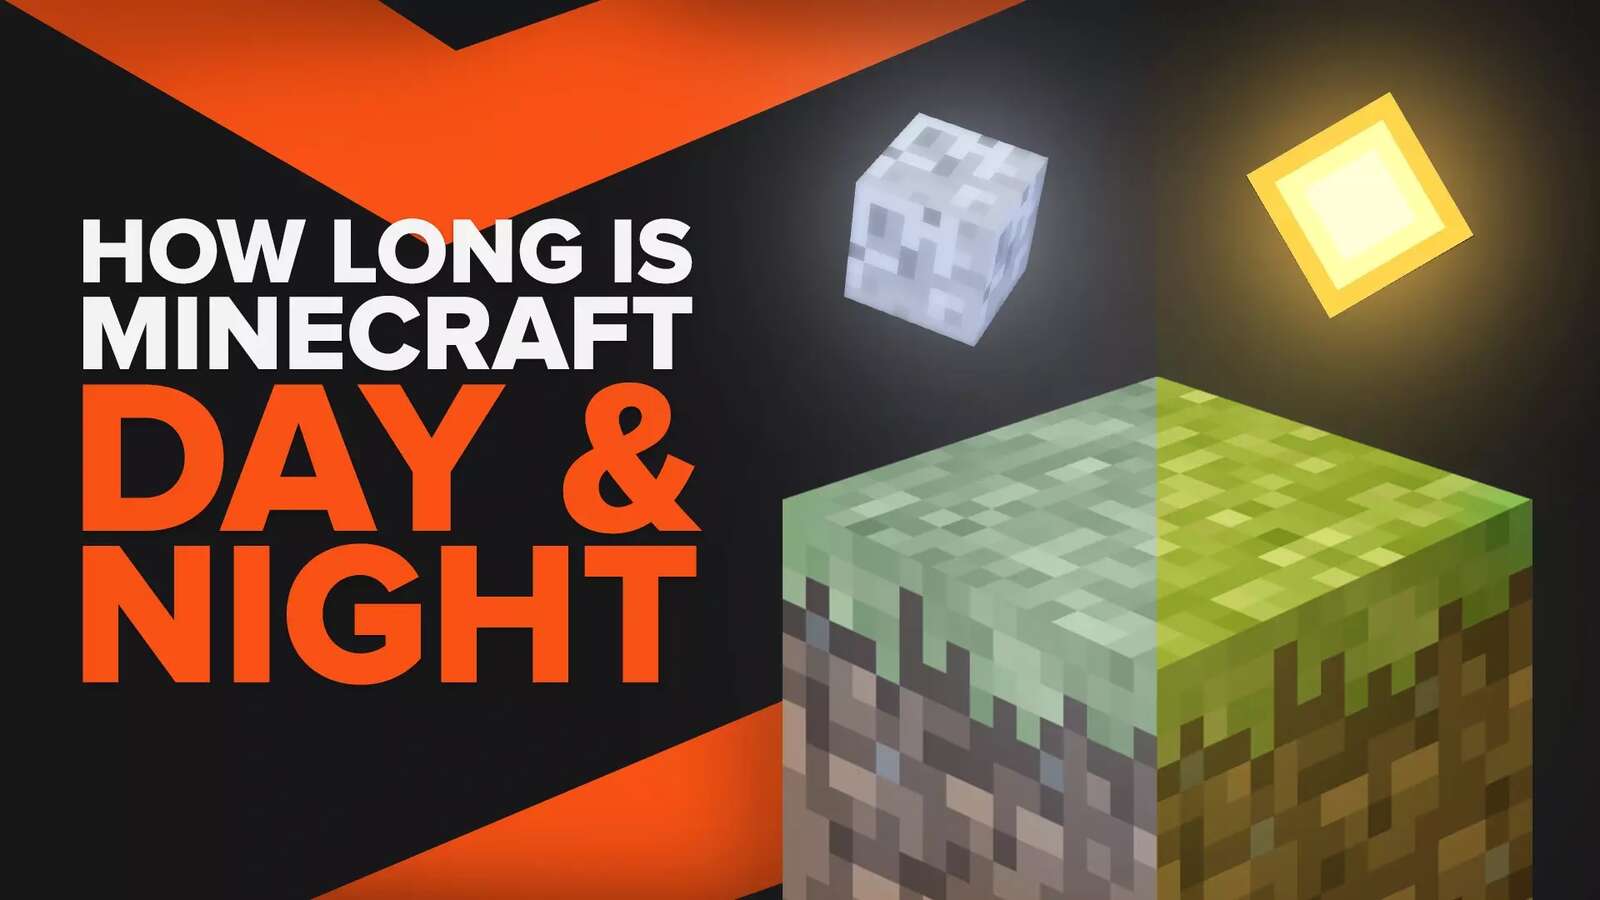 How Long Is a Minecraft Day and Night? [In-Depth Answer]